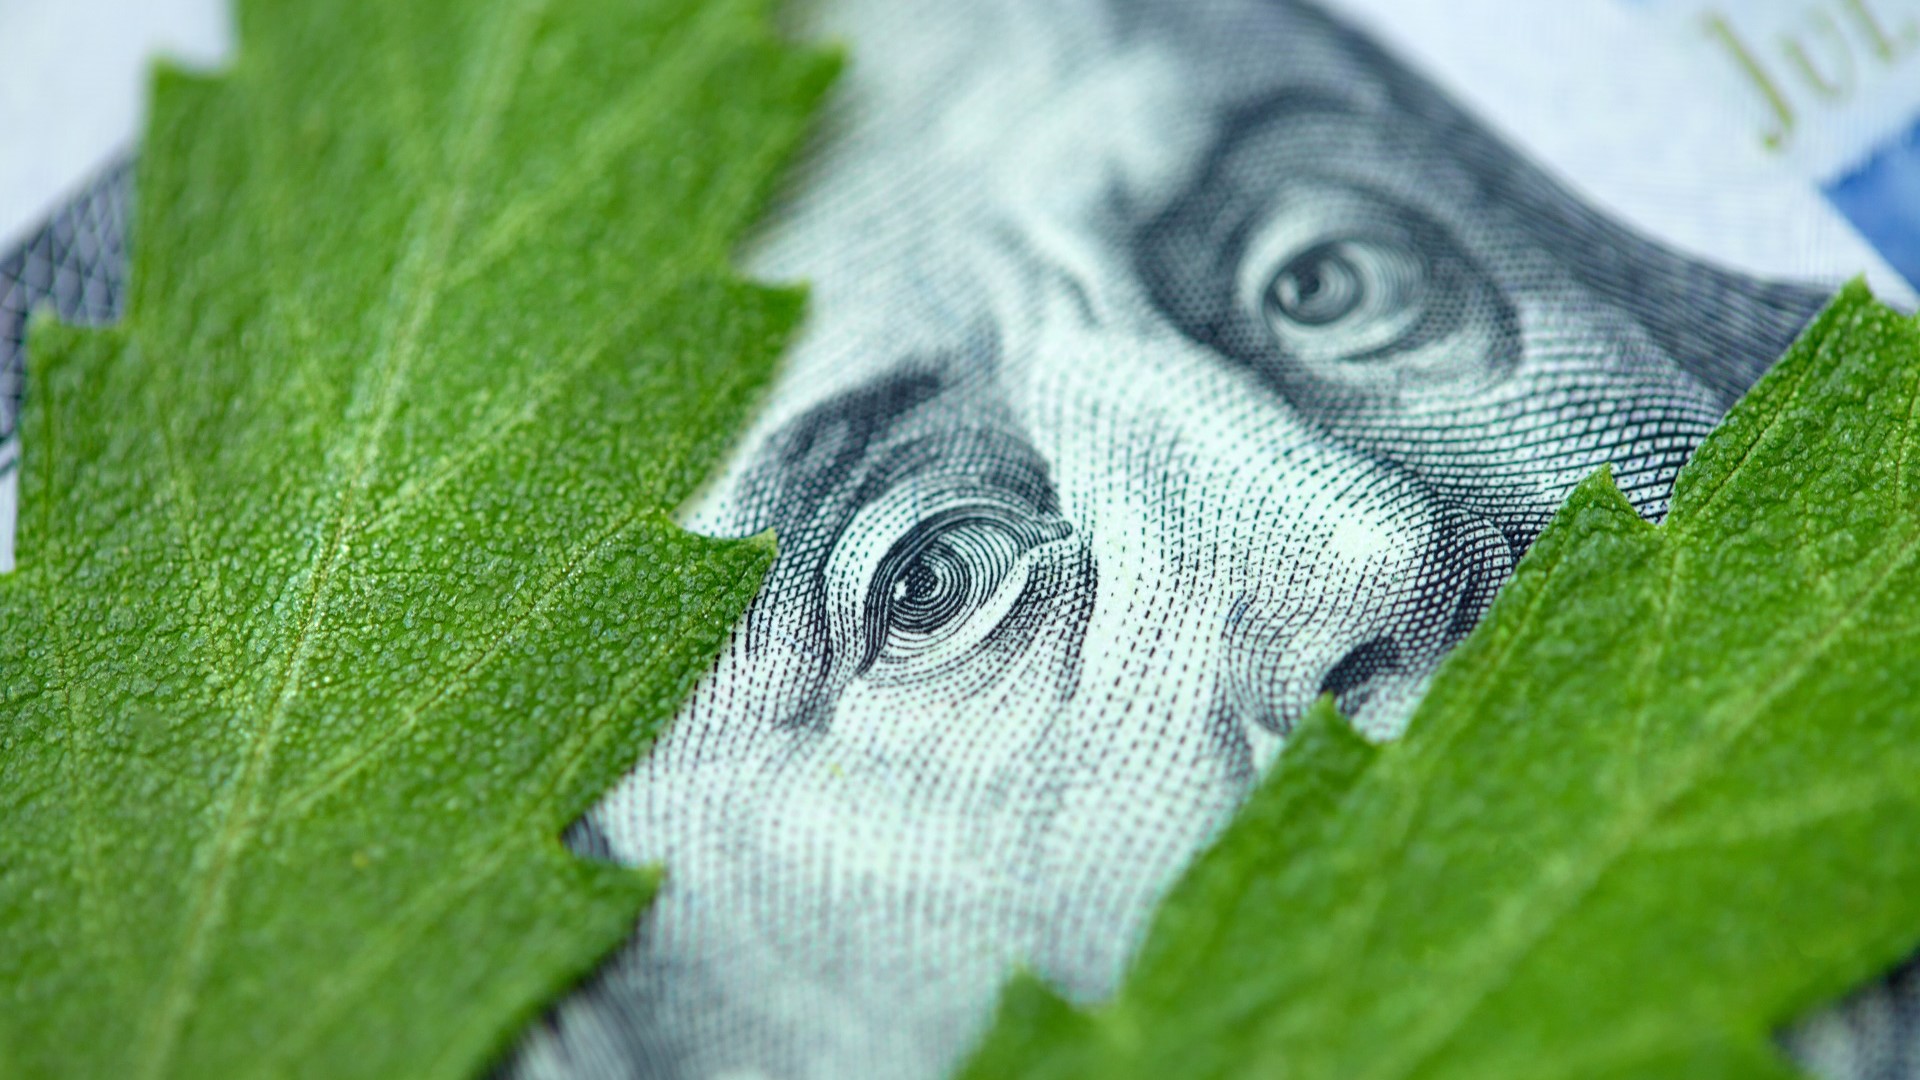 House Approves Marijuana Banking Reform Bill - What It Means for the State of Legal Cannabis